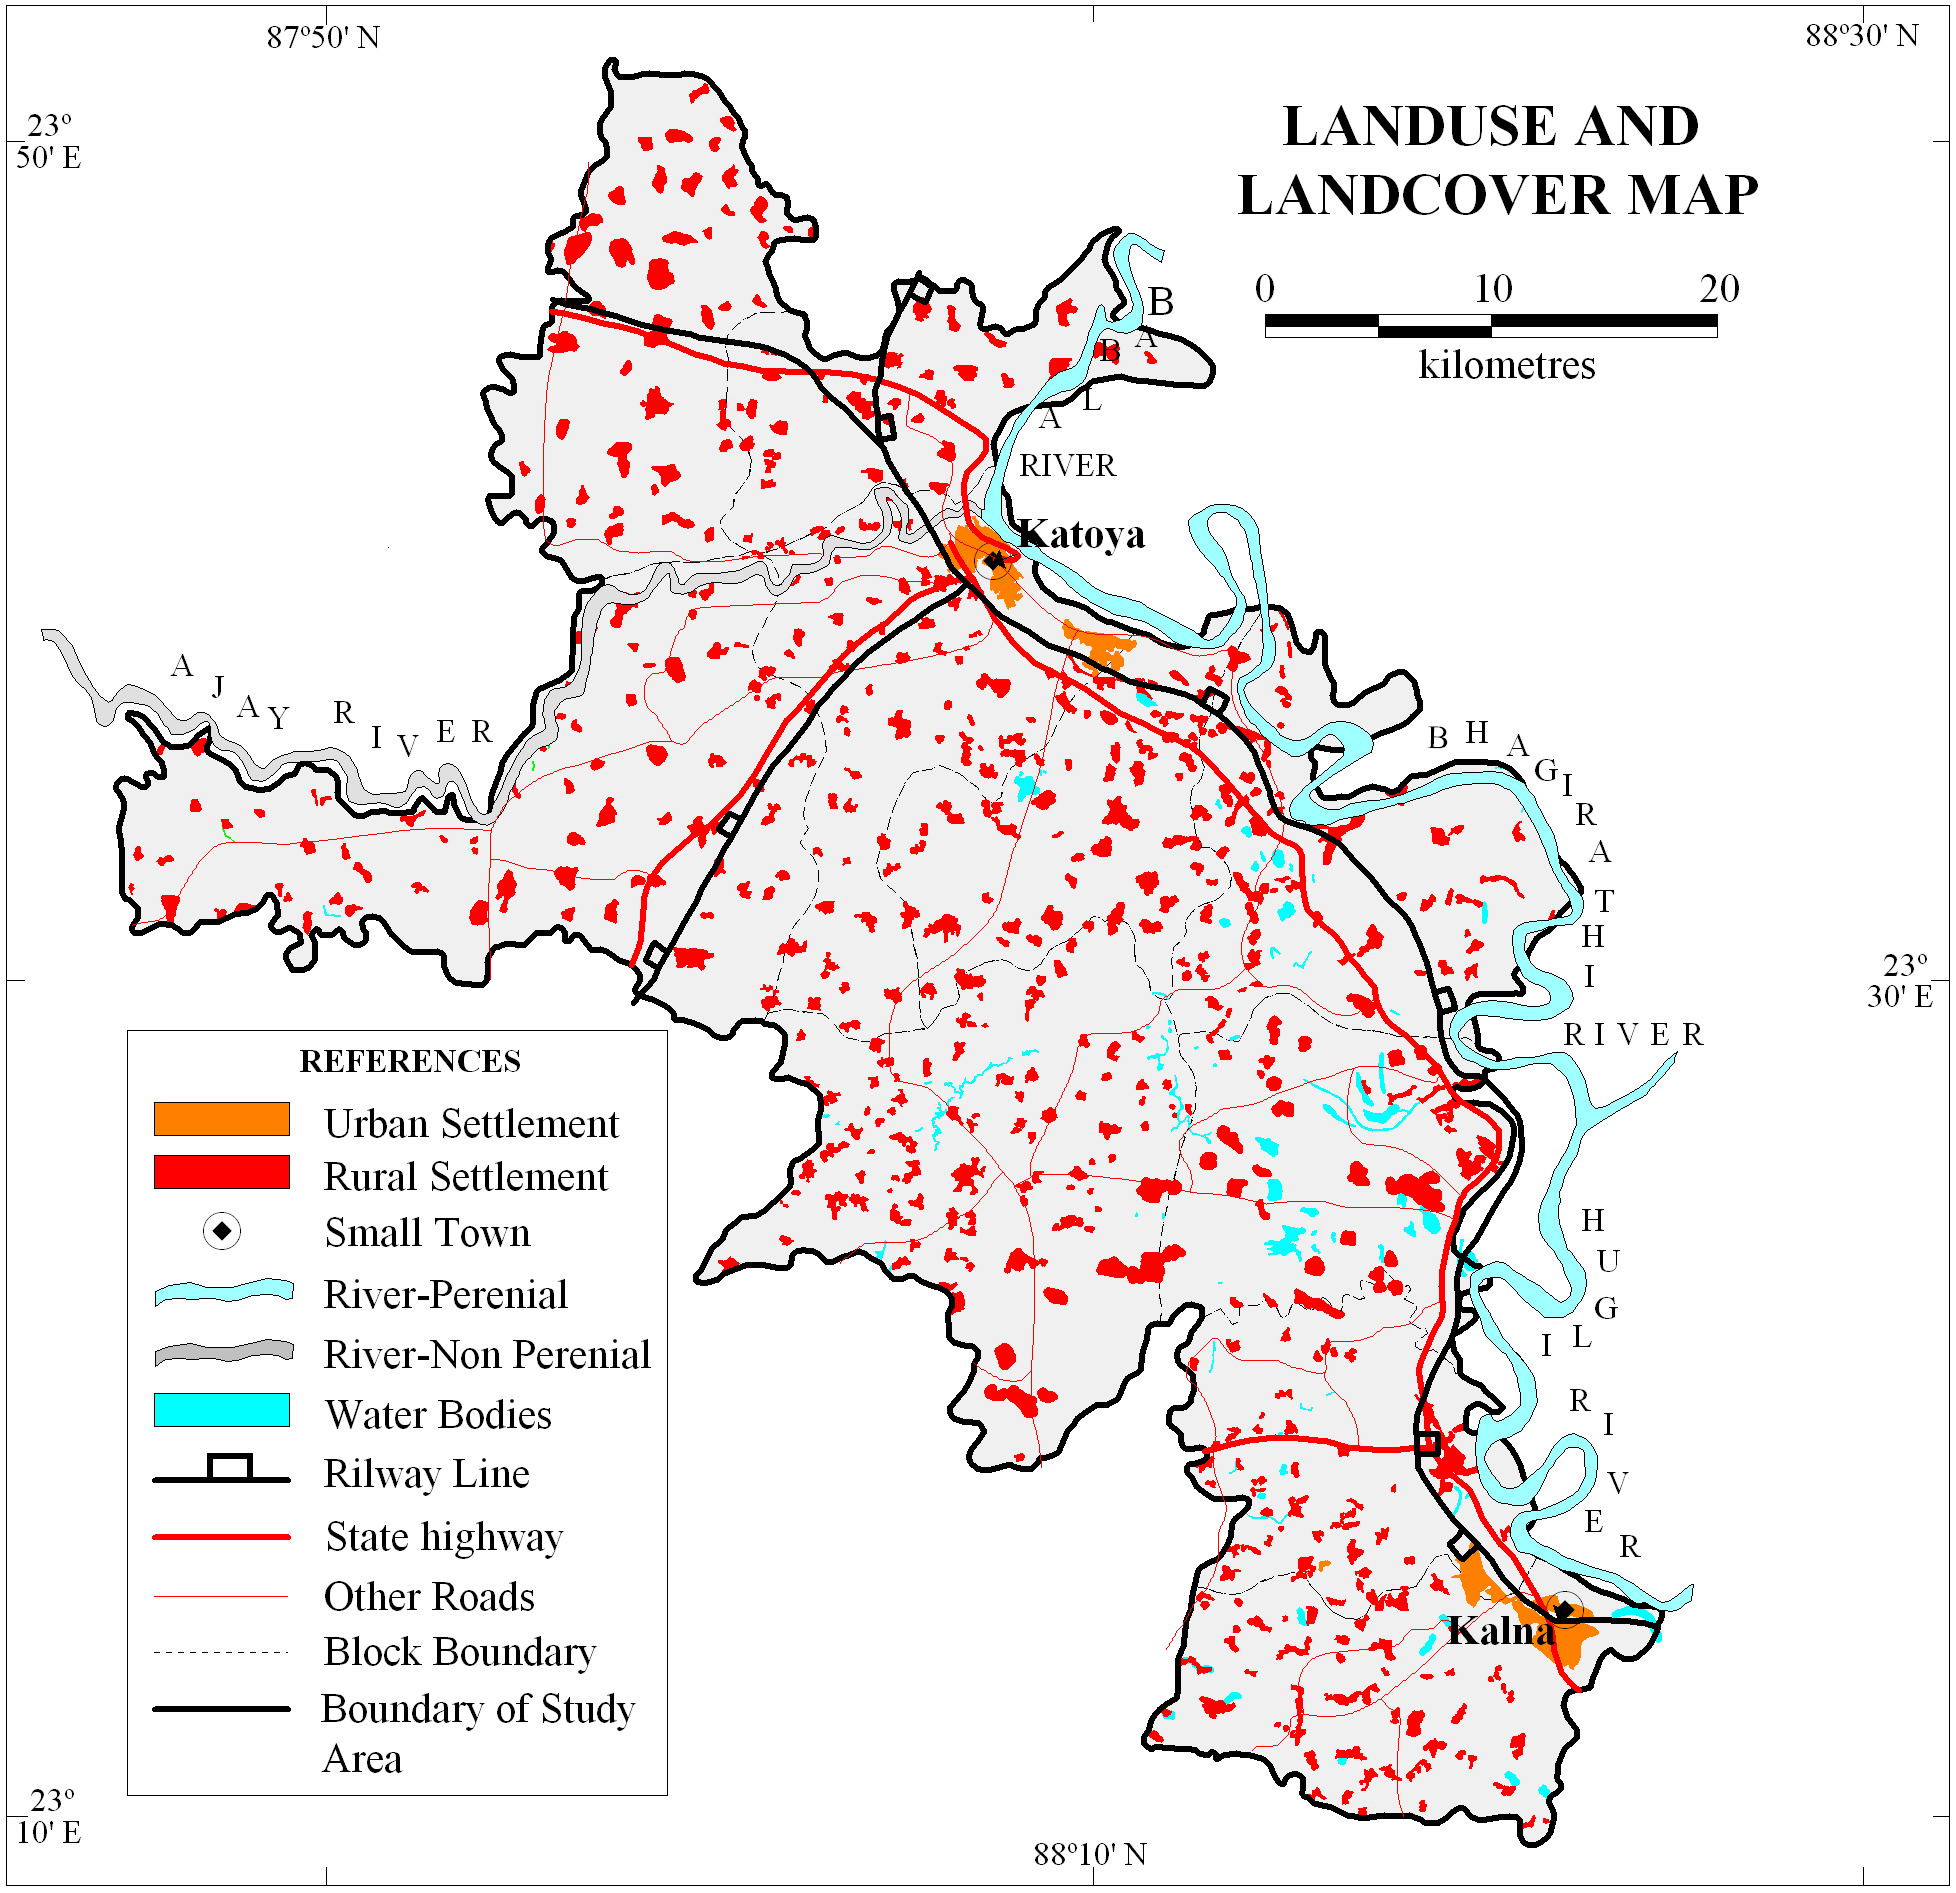 c:\users\mr. president\desktop\nasima thesis back-up2\final\map for final thesis\landuse and landcover map.bmp